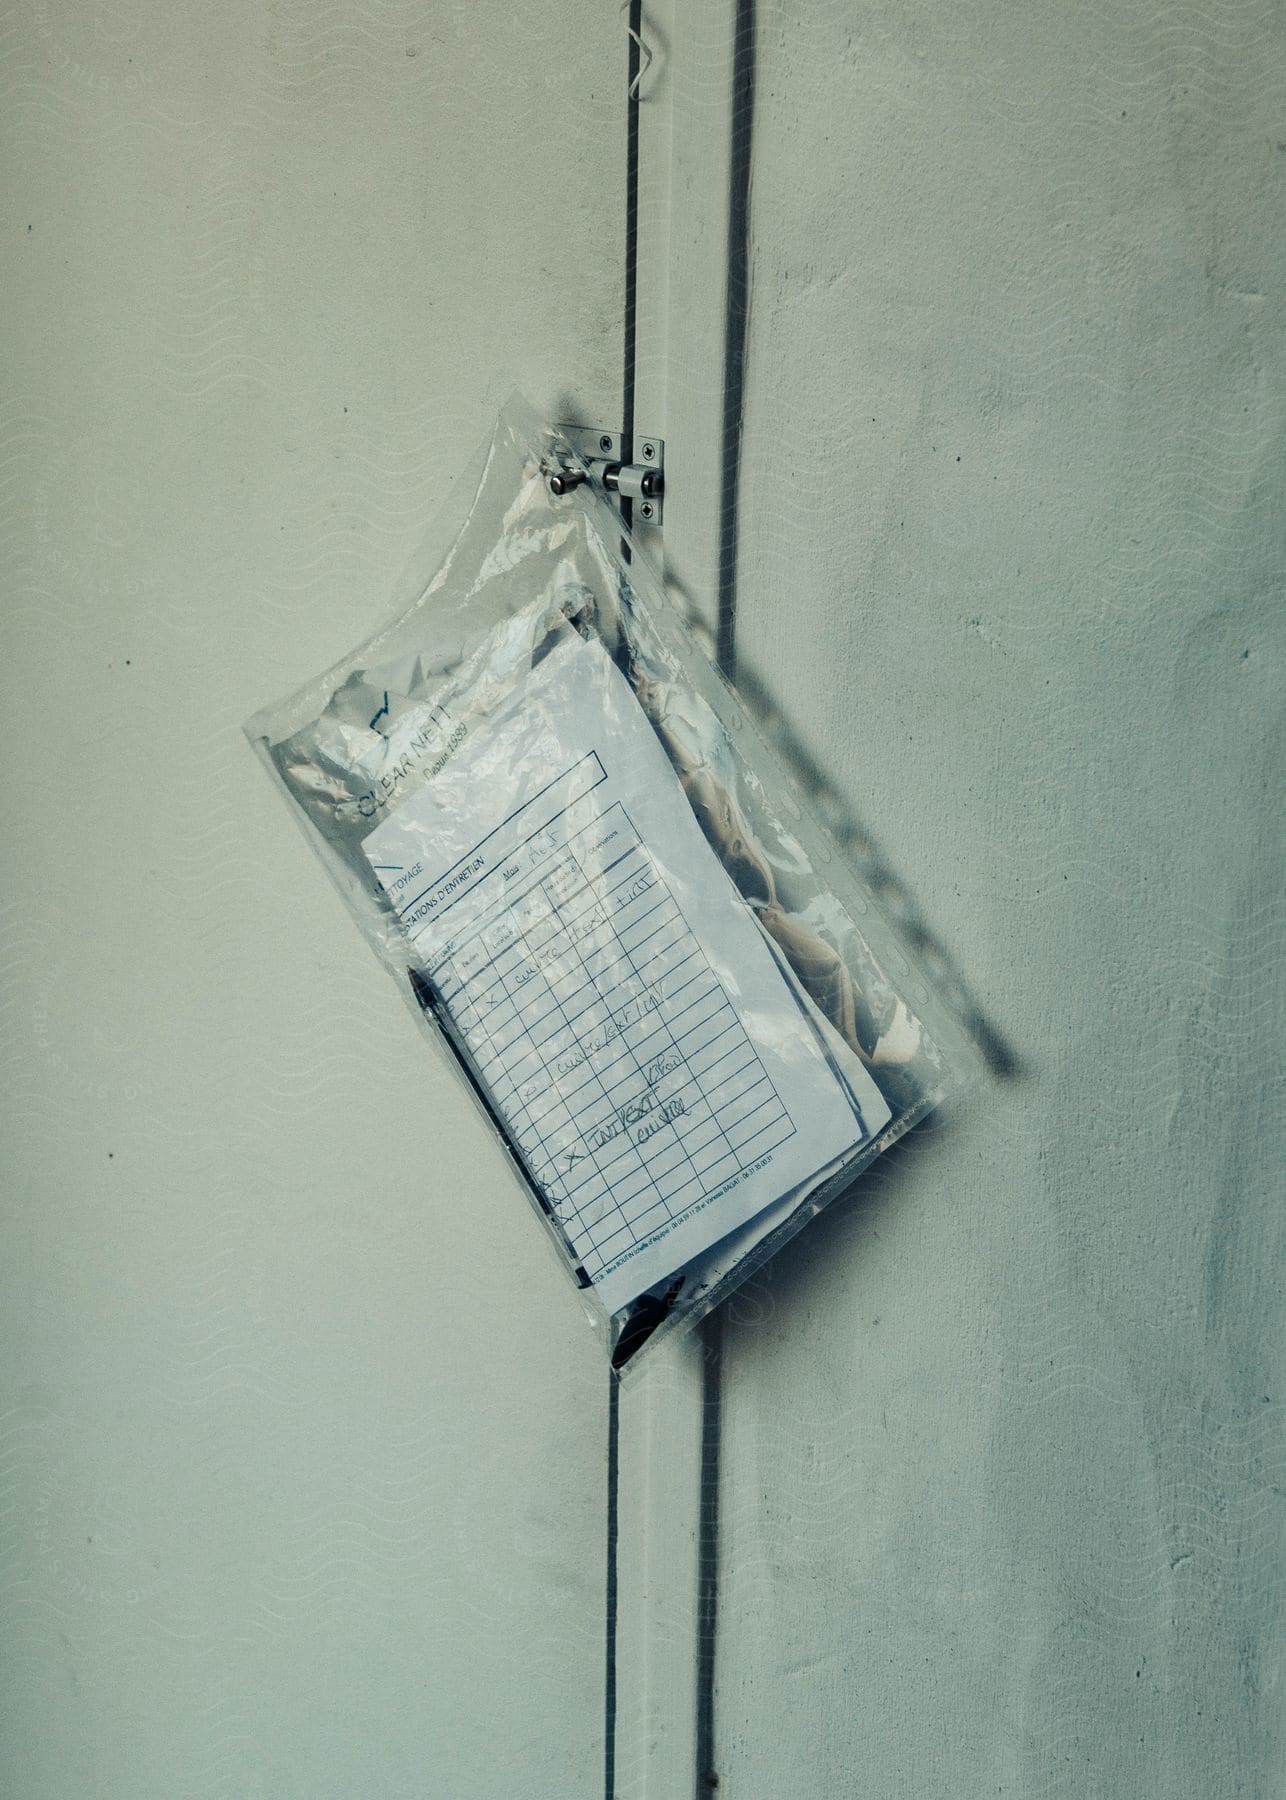 A bag of liquid hanging next to a wall